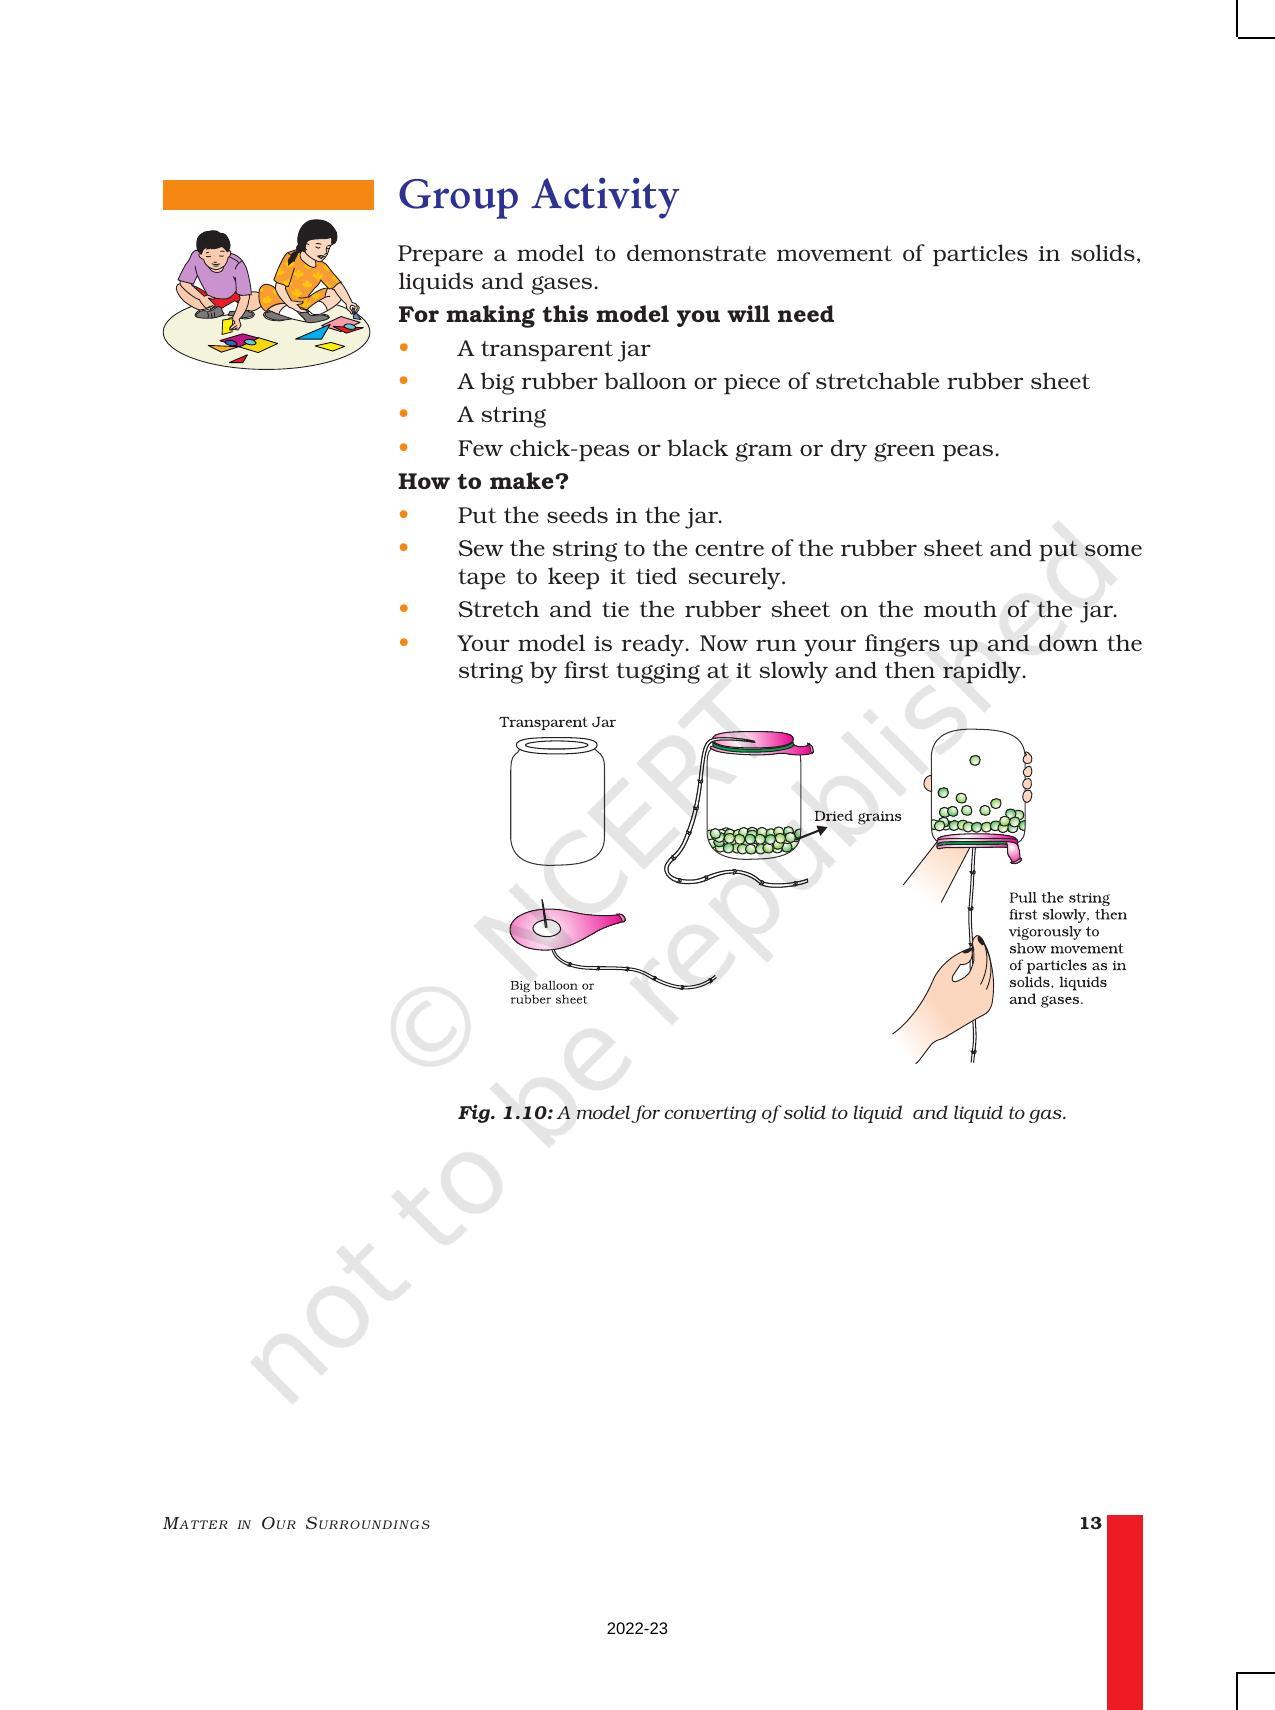 NCERT Book for Class 9 Science Chapter 1 Matter in Our Surroundings - Page 13